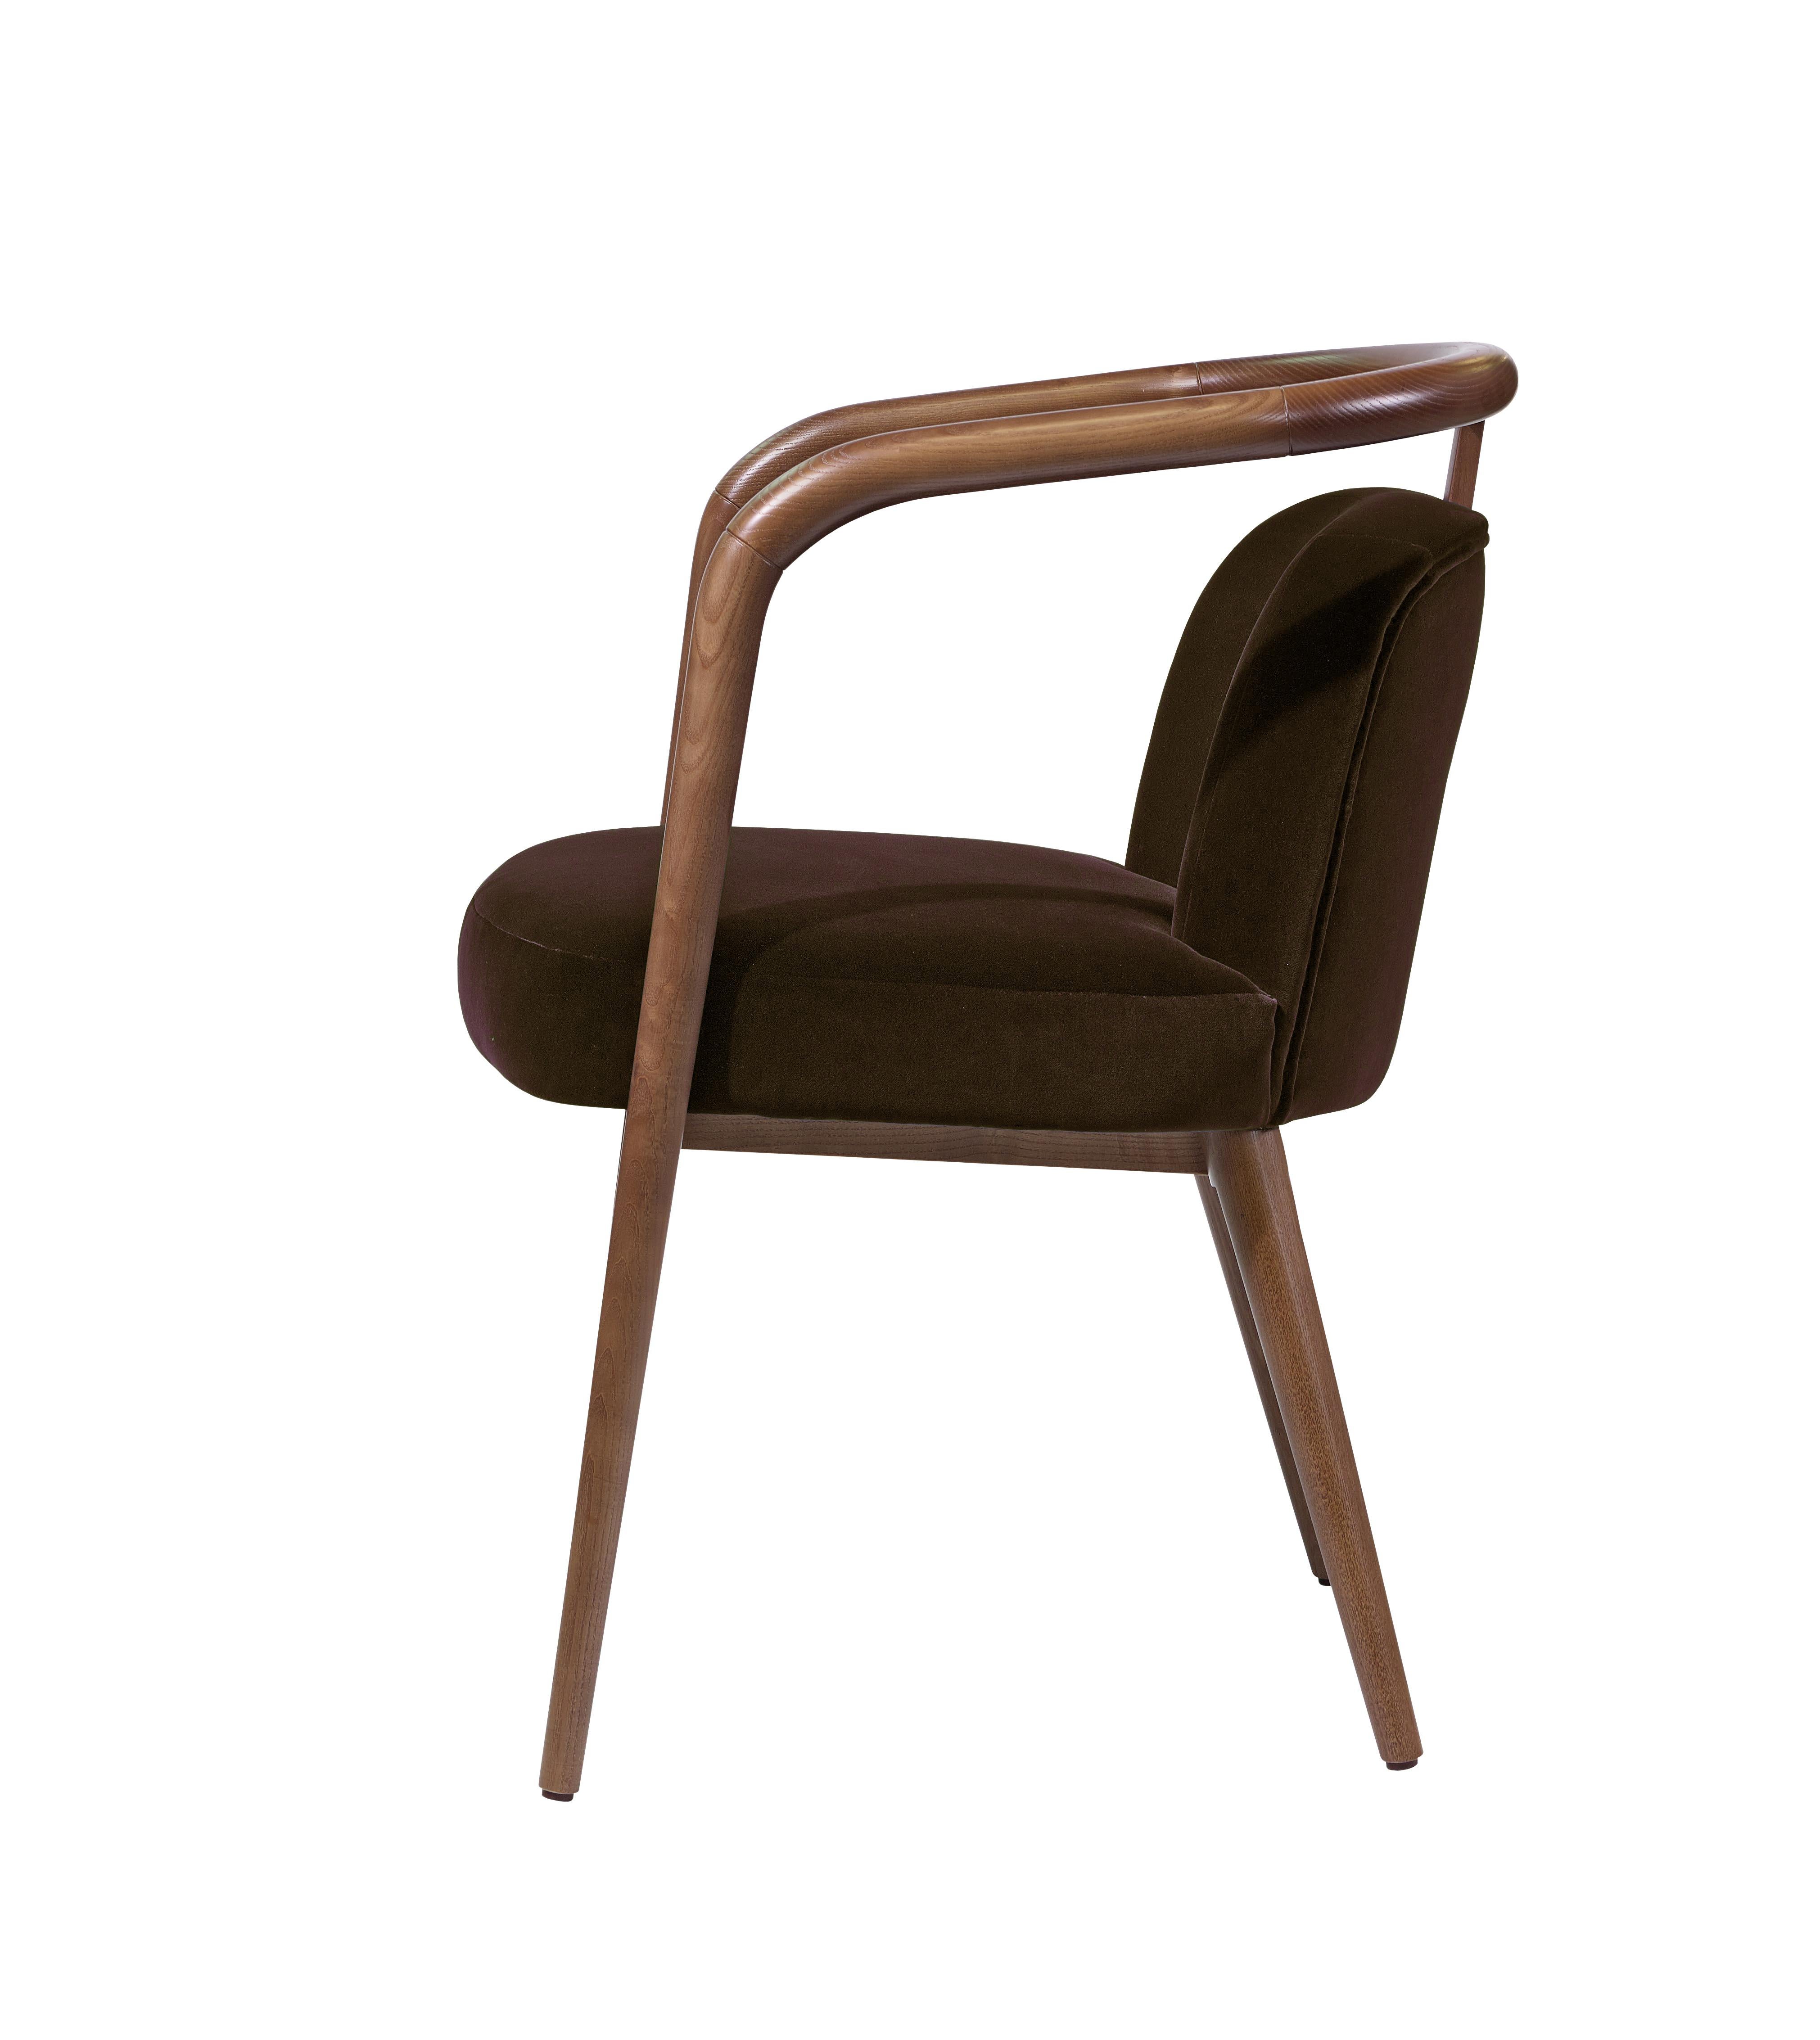 A sleek chair with an artistic appeal, that was inspired by the architecture of New York City buildings in this case The Essex Building in Central Park south.
This chair is designed to fit in many environments, no matter the affair, in order to